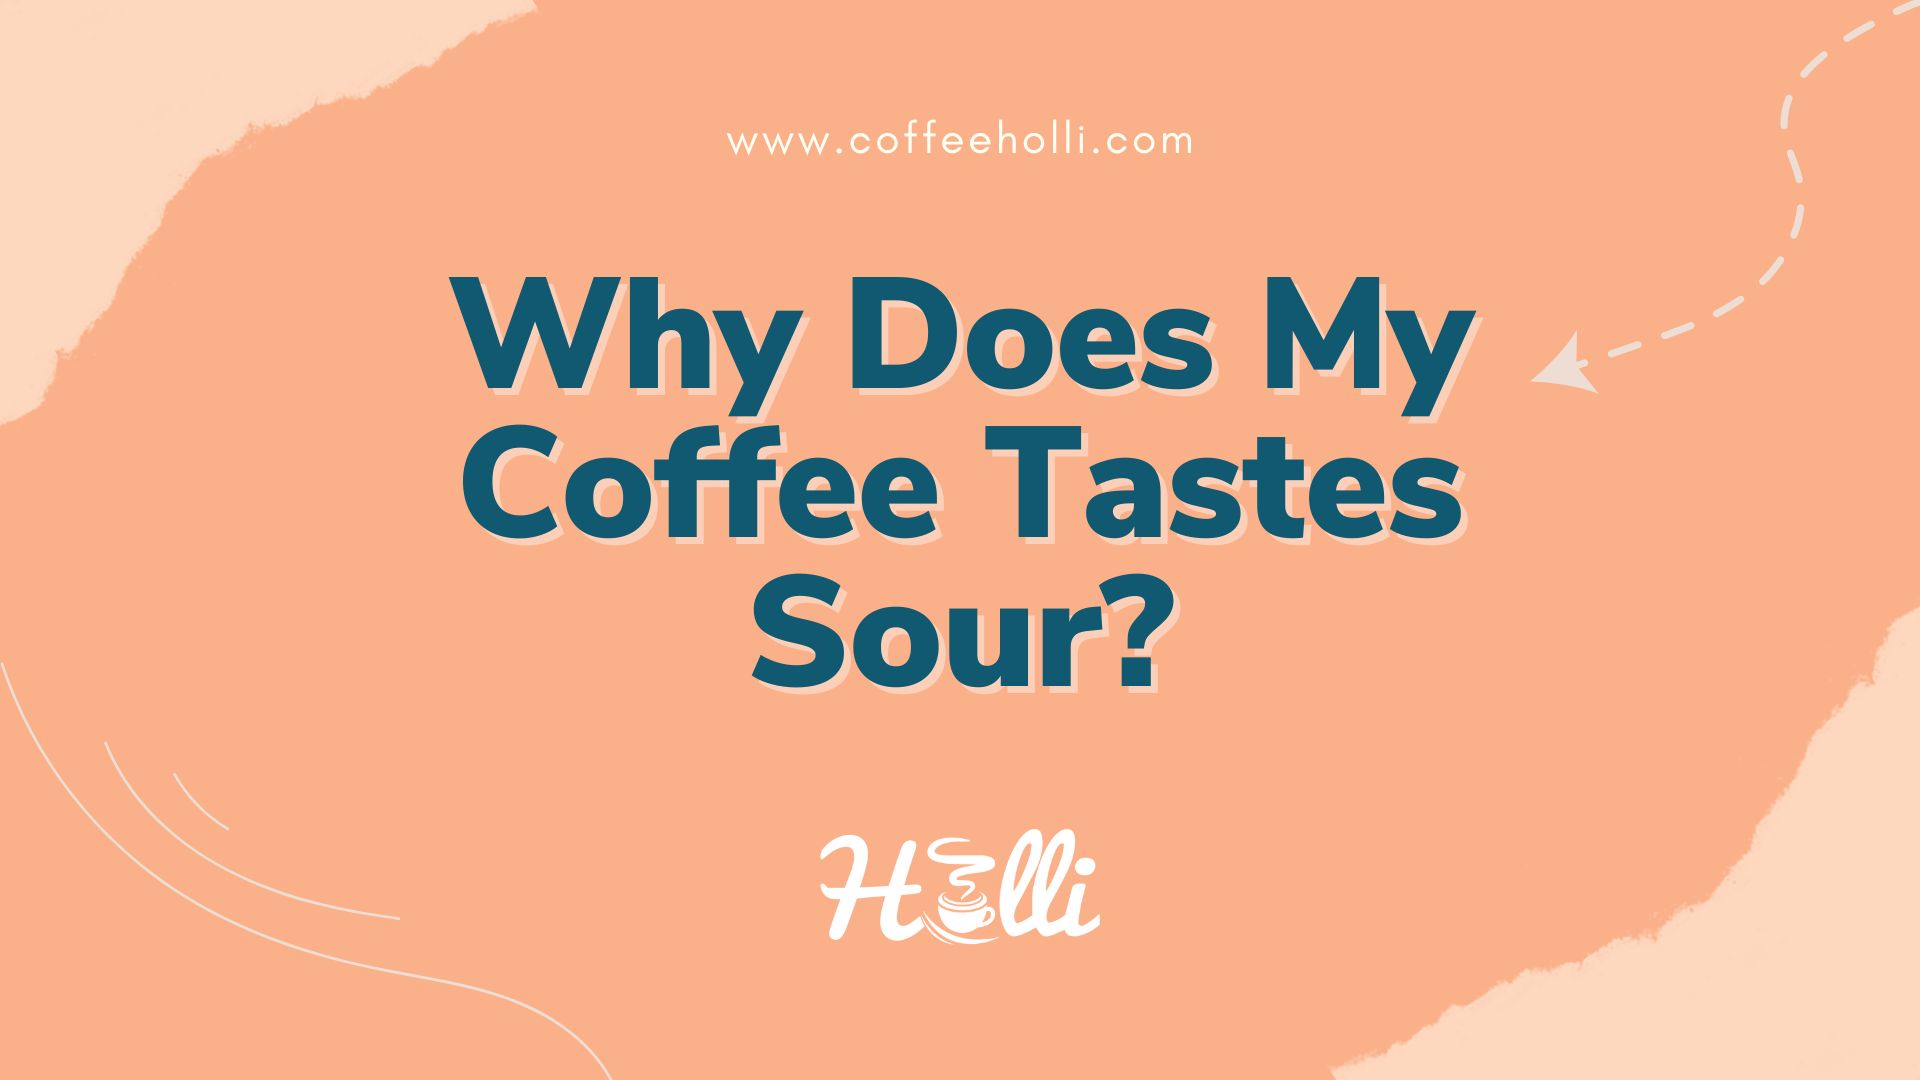 Why Does My Coffee Tastes Sour